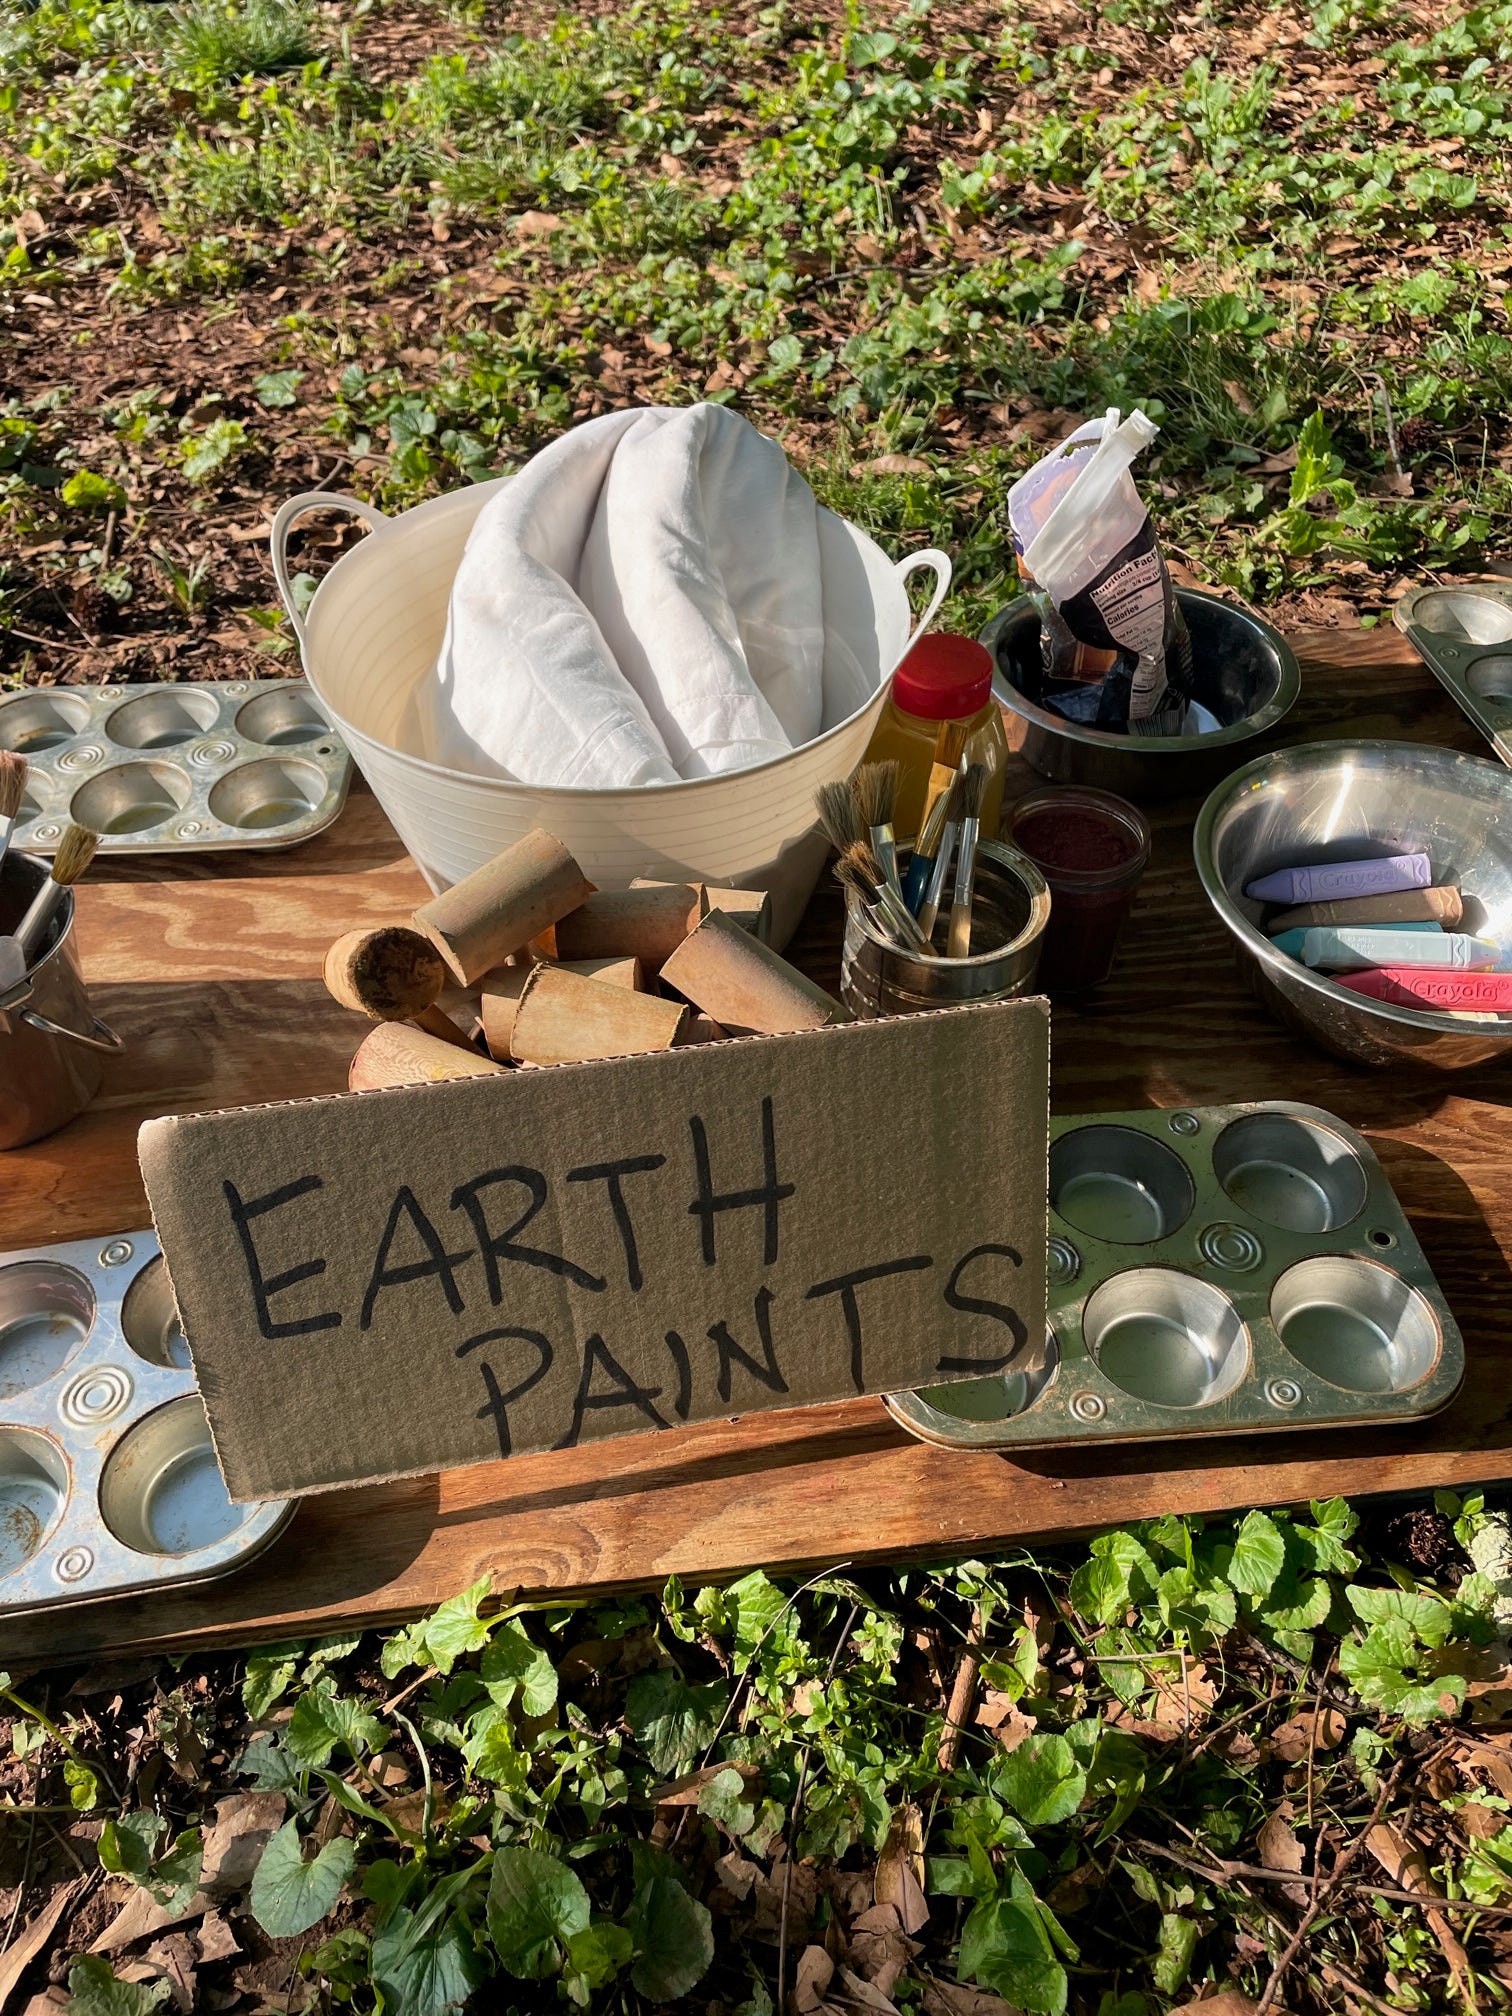 Earth Paints: we can set up a painting station to make paint using chalk, charcoal, terra cotta, berries, and more. 